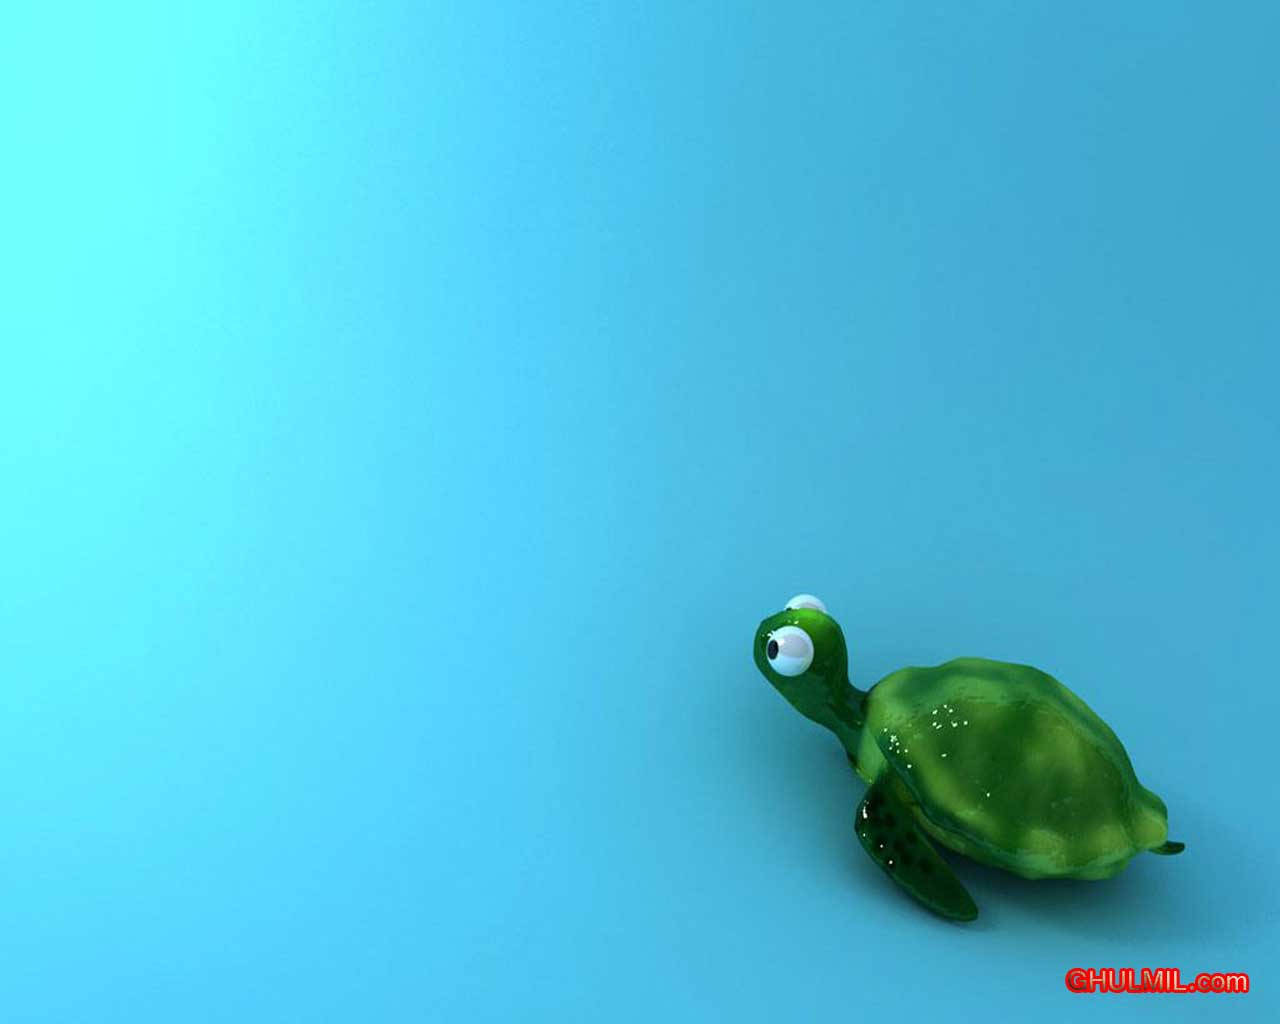 Download Green Turtle On Blue Surface Cute Computer Wallpaper | Wallpapers .com